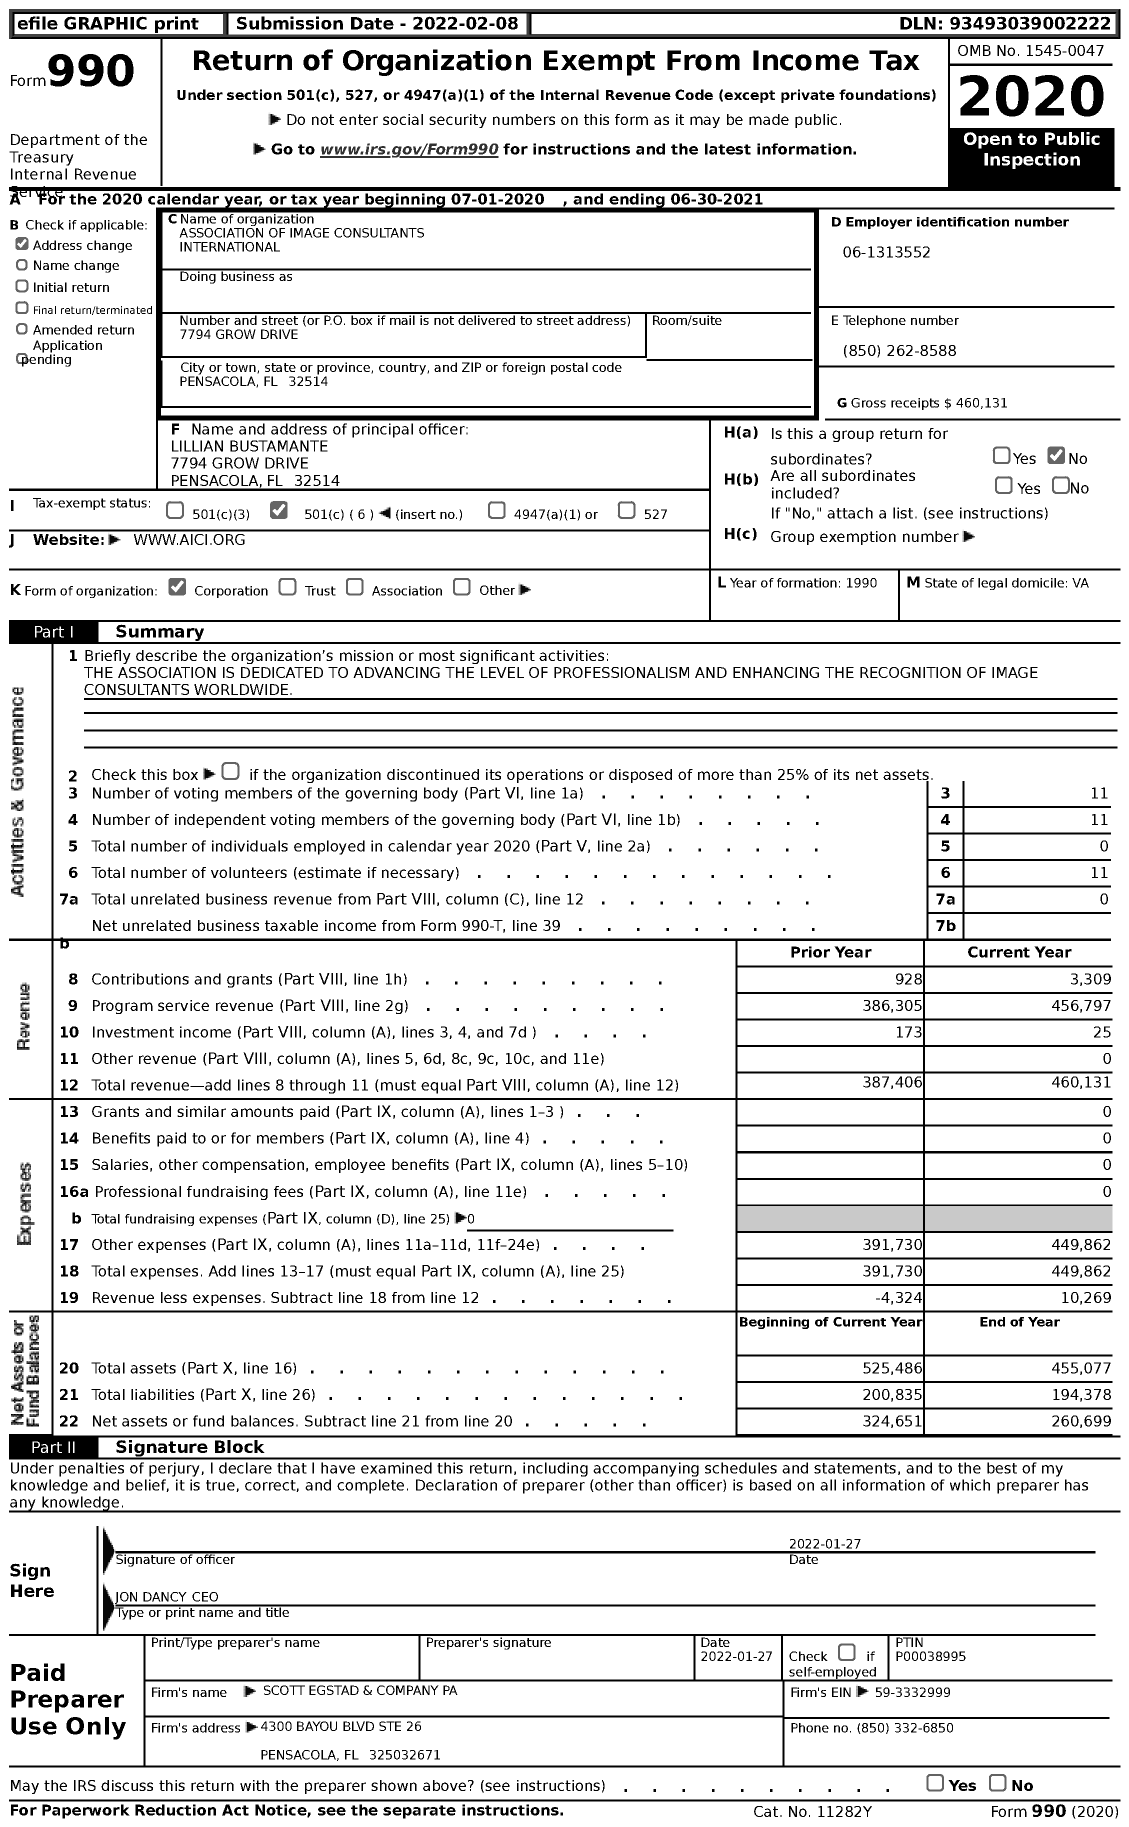 Image of first page of 2020 Form 990 for Association of Image Consultants International